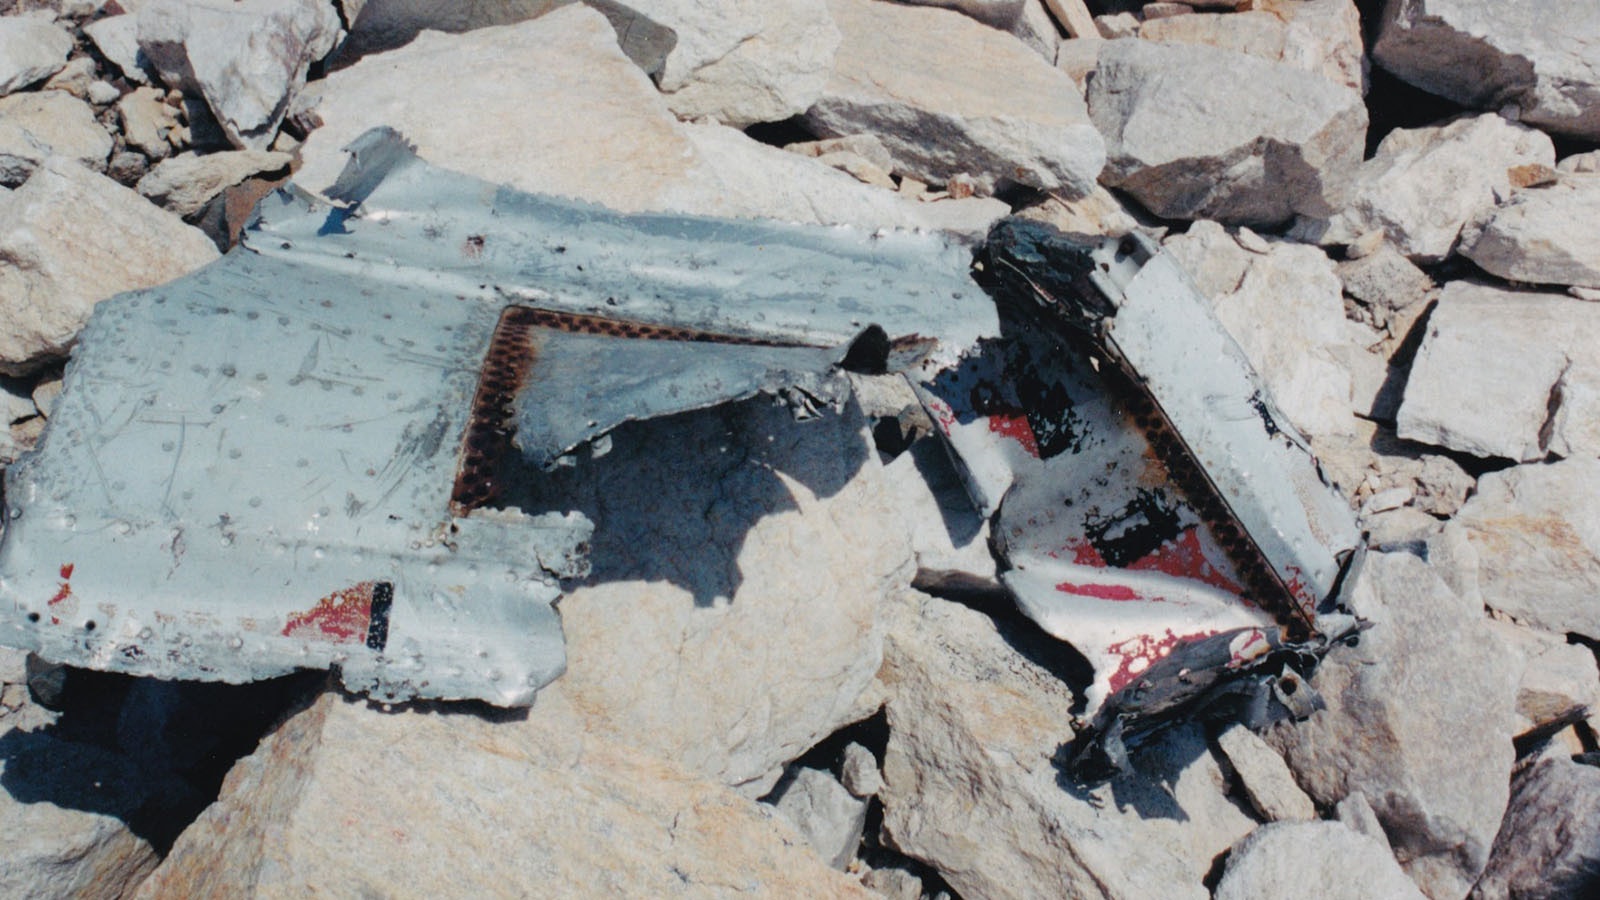 First responders to the United Air Lines Flight 409 crash site found a large debris field on Medicine Bow Mountain. Among the parts that were distinguishable were the airplane’s four engines.